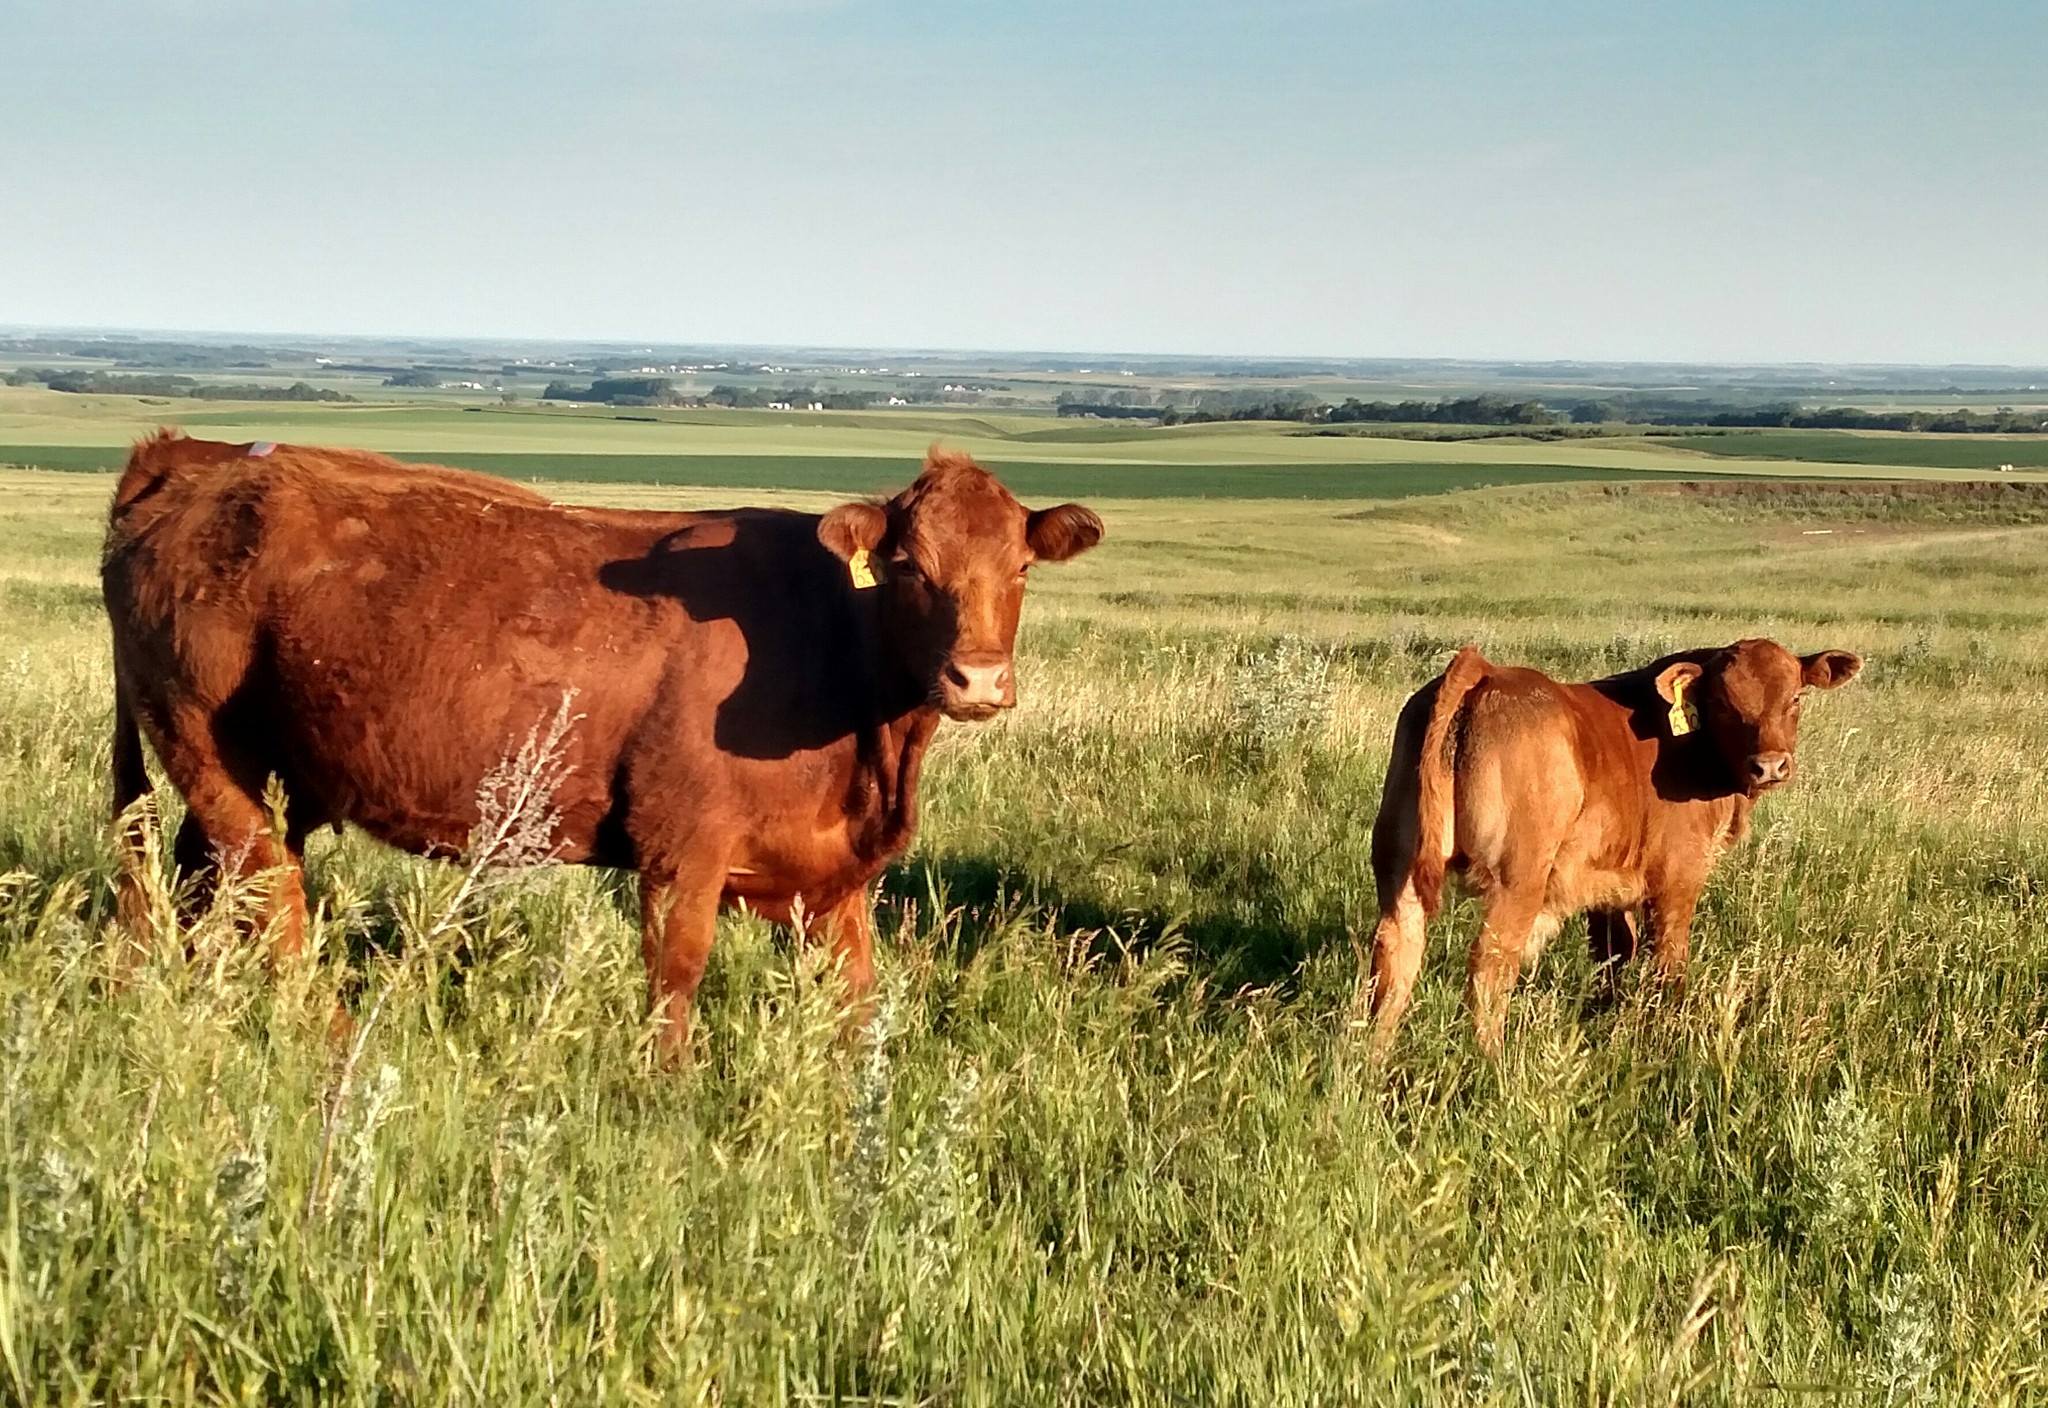 Access to Efficiency: The Symens Farm Family & Conservation Practices